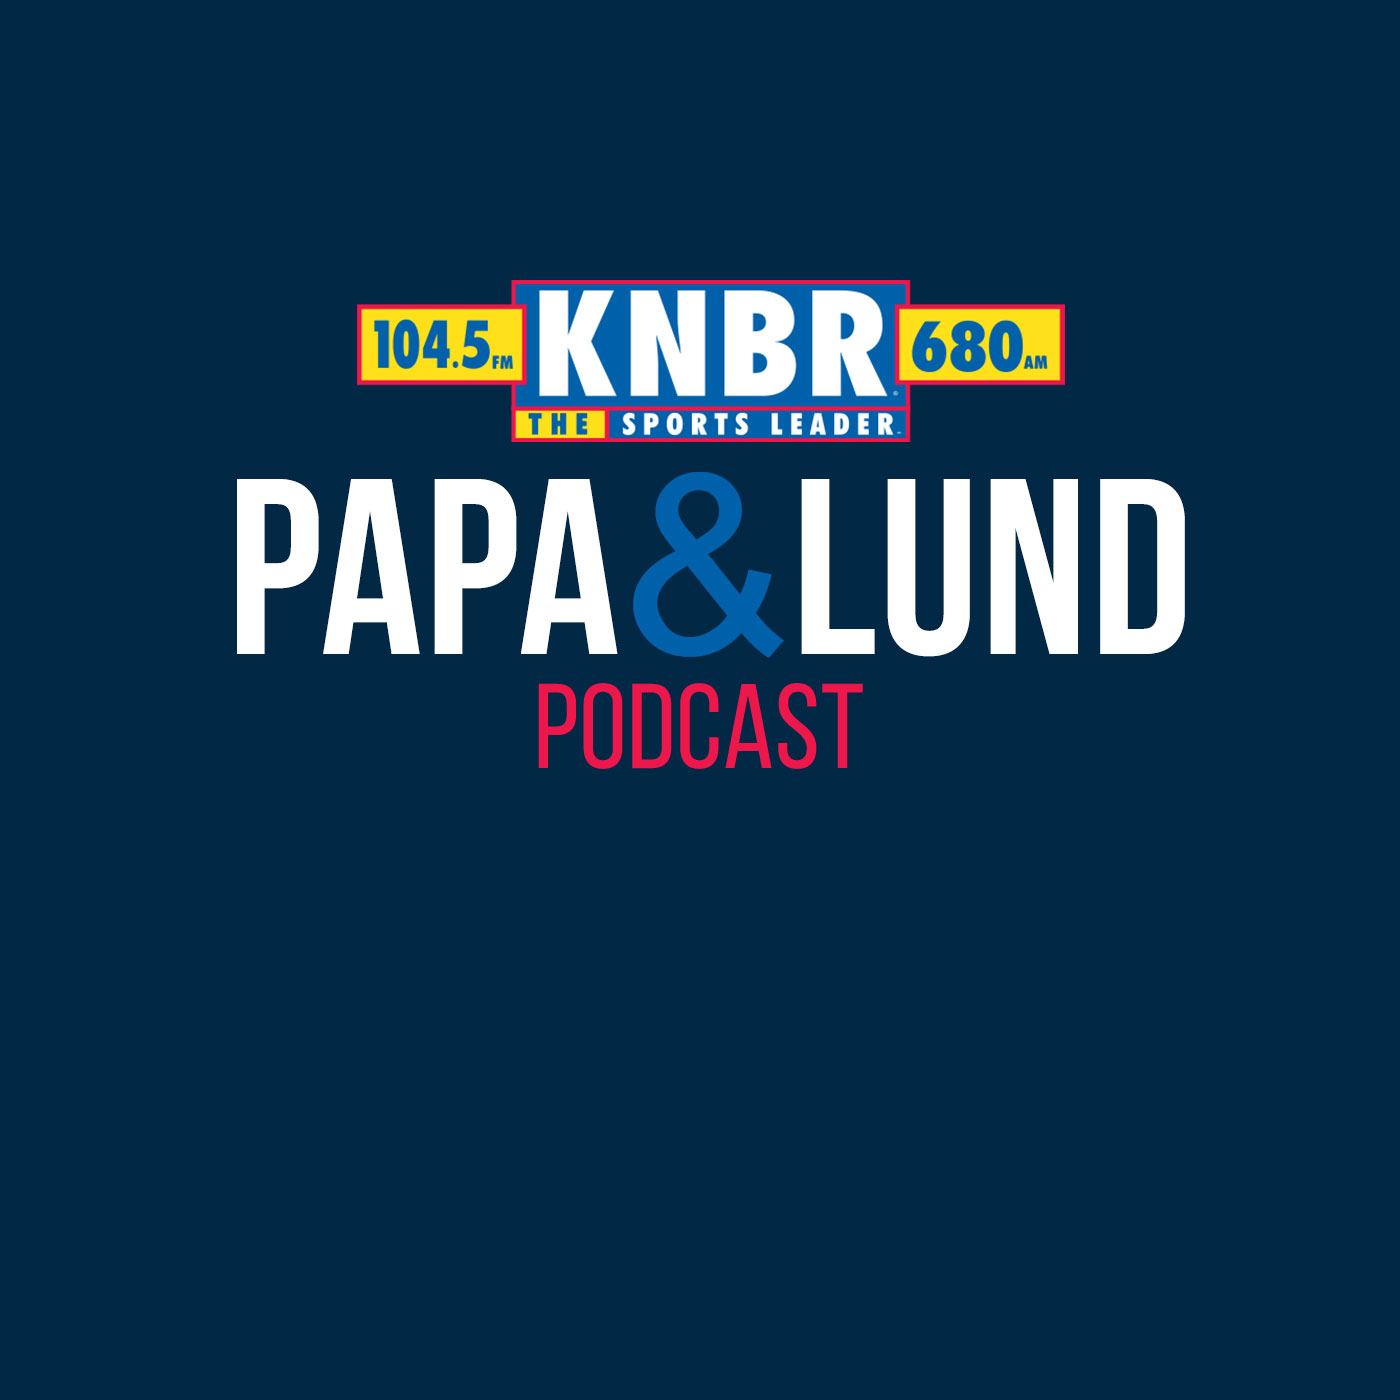 2-7 Marcus Thompson discusses the latest trade rumors around the NBA with Papa & Lund